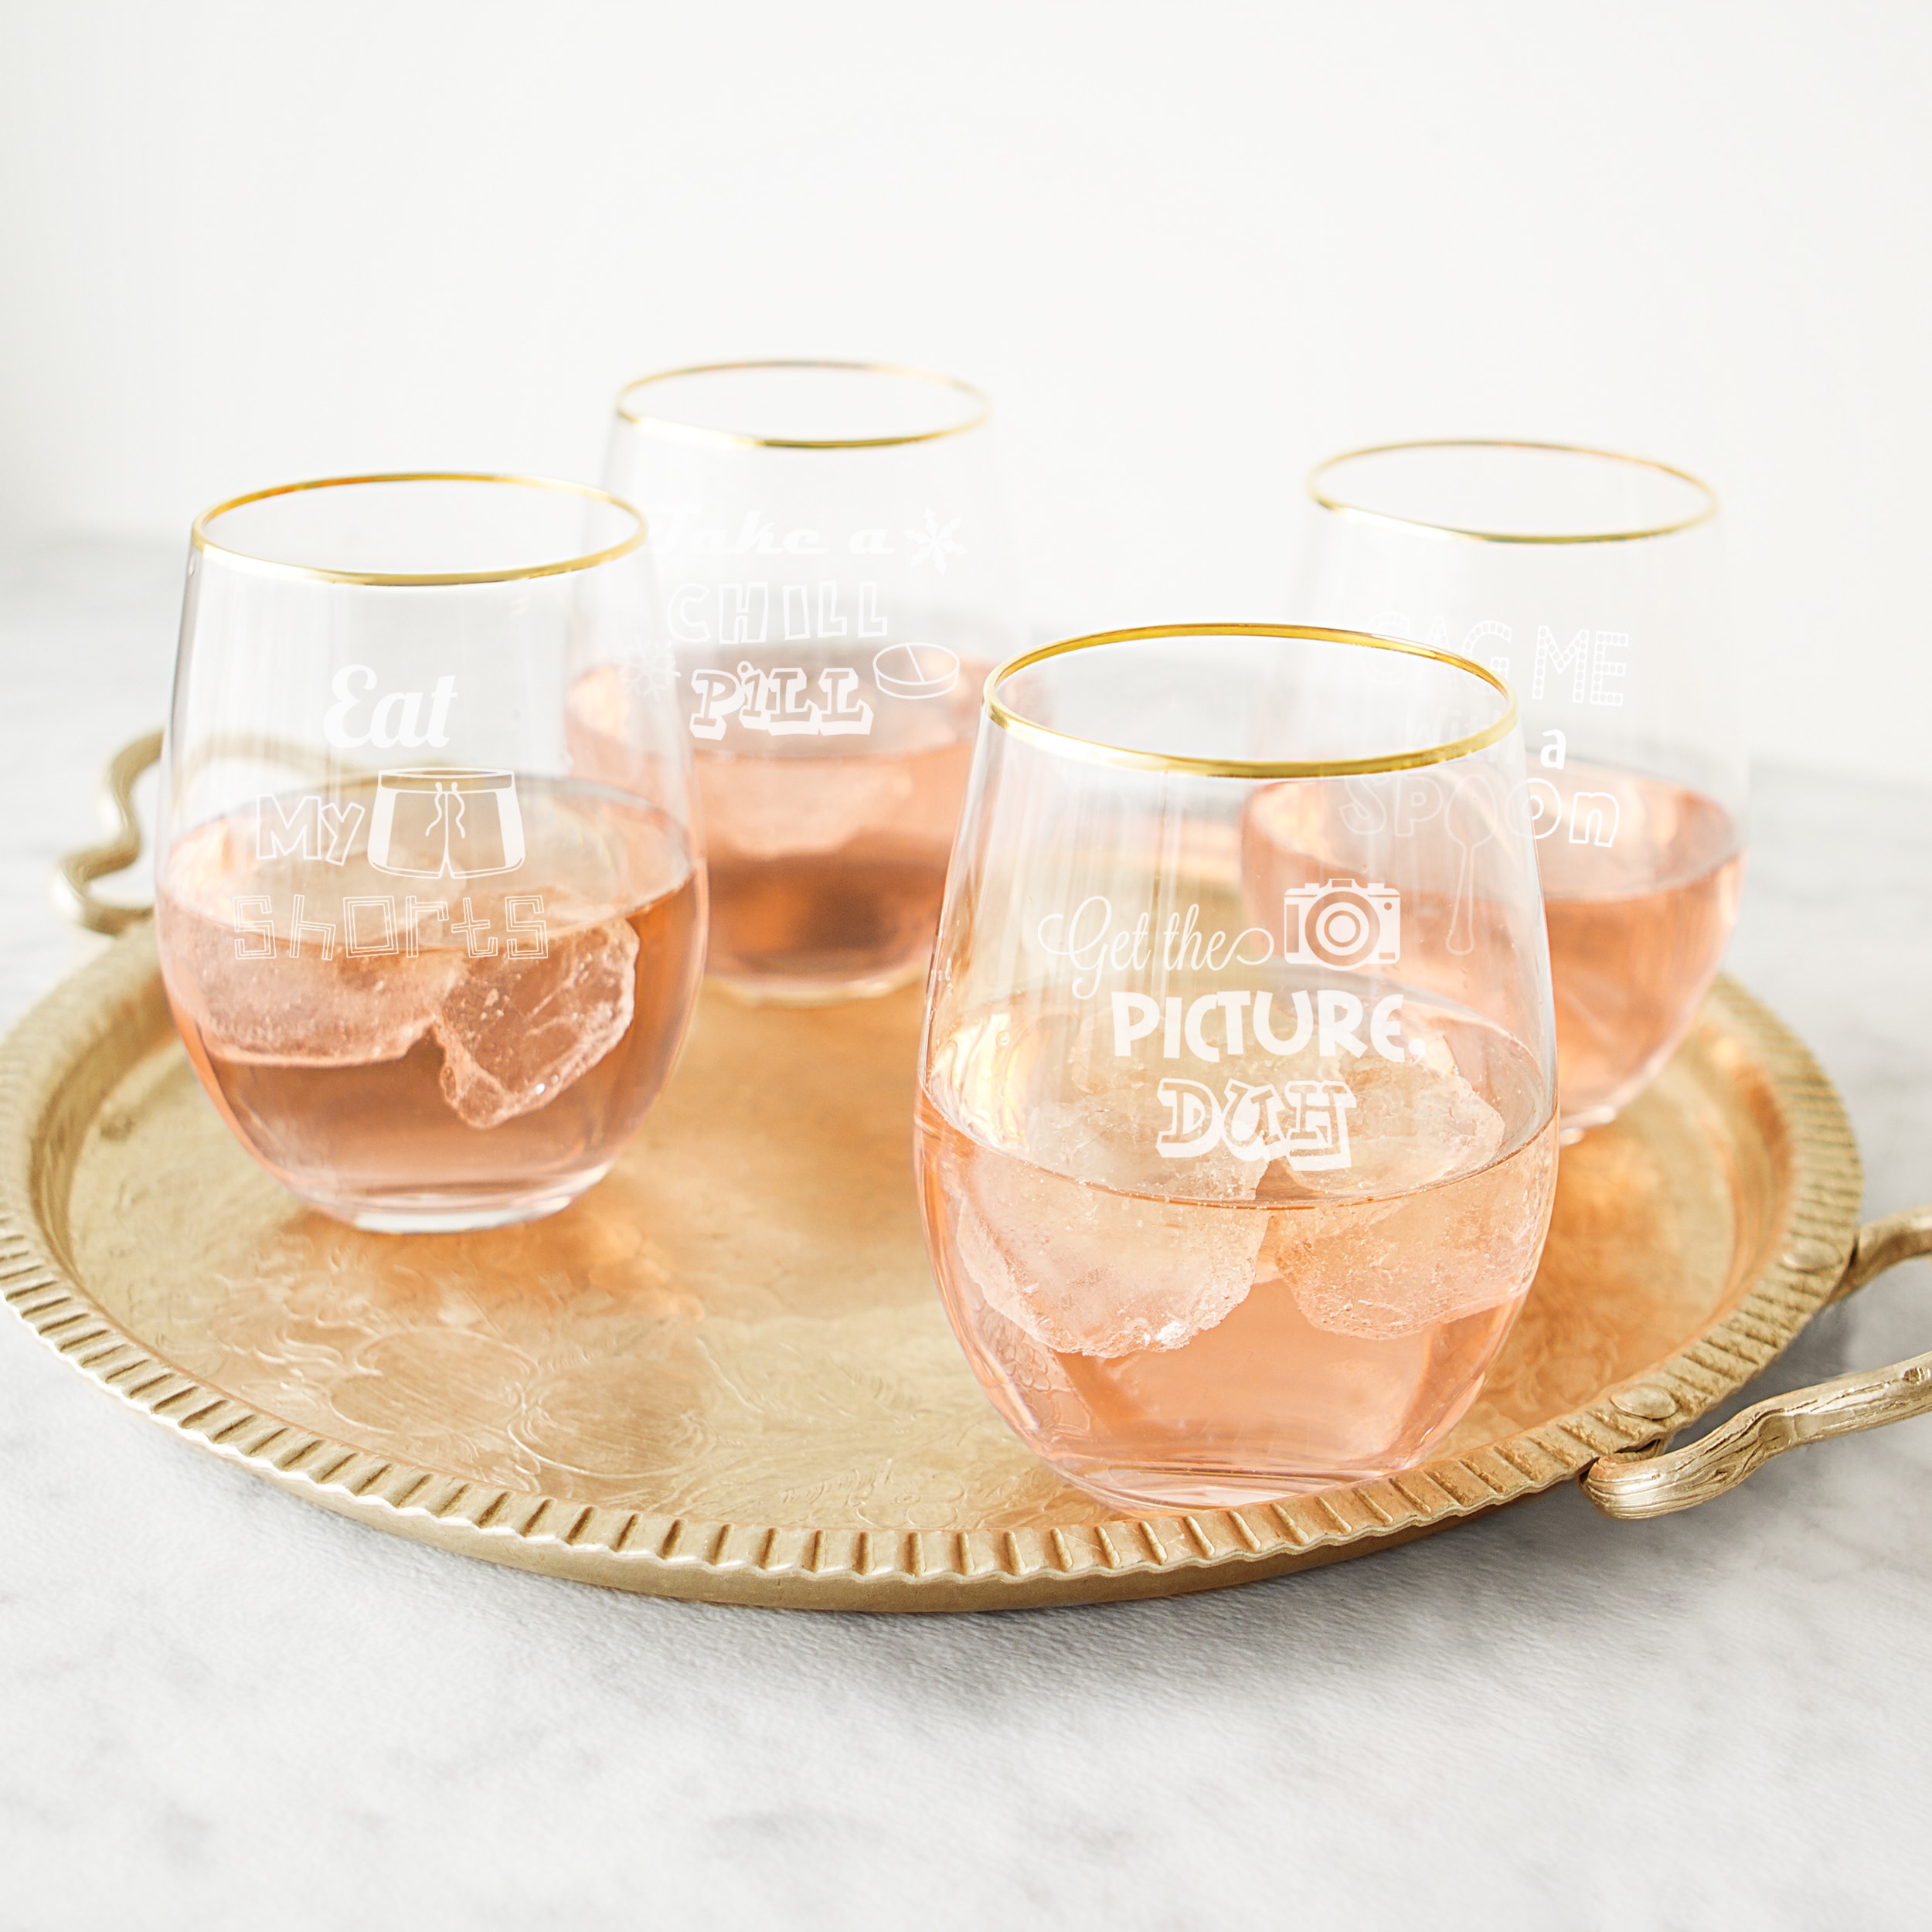 https://ak1.ostkcdn.com/images/products/16750241/90s-Throwback-Gold-Rim-Stemless-Wine-Glasses-Set-of-4-6cc7c952-f581-4dd6-9a13-8dee10dccdc5.jpg